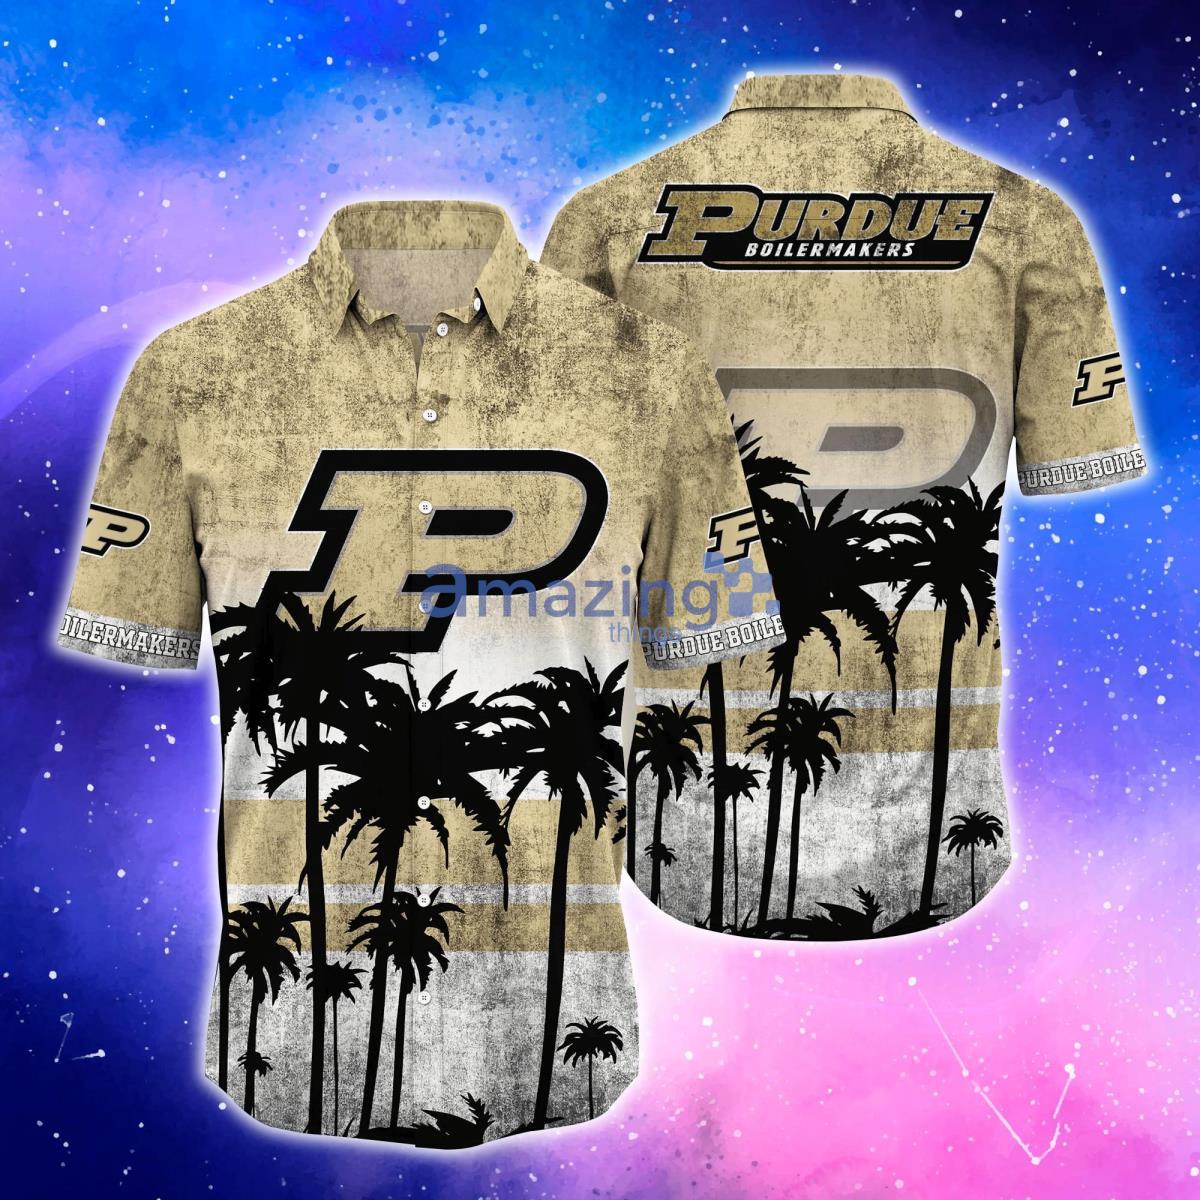 Purdue Boilermakers Trending Hawaiian Shirt And Shorts For Fans Product Photo 1